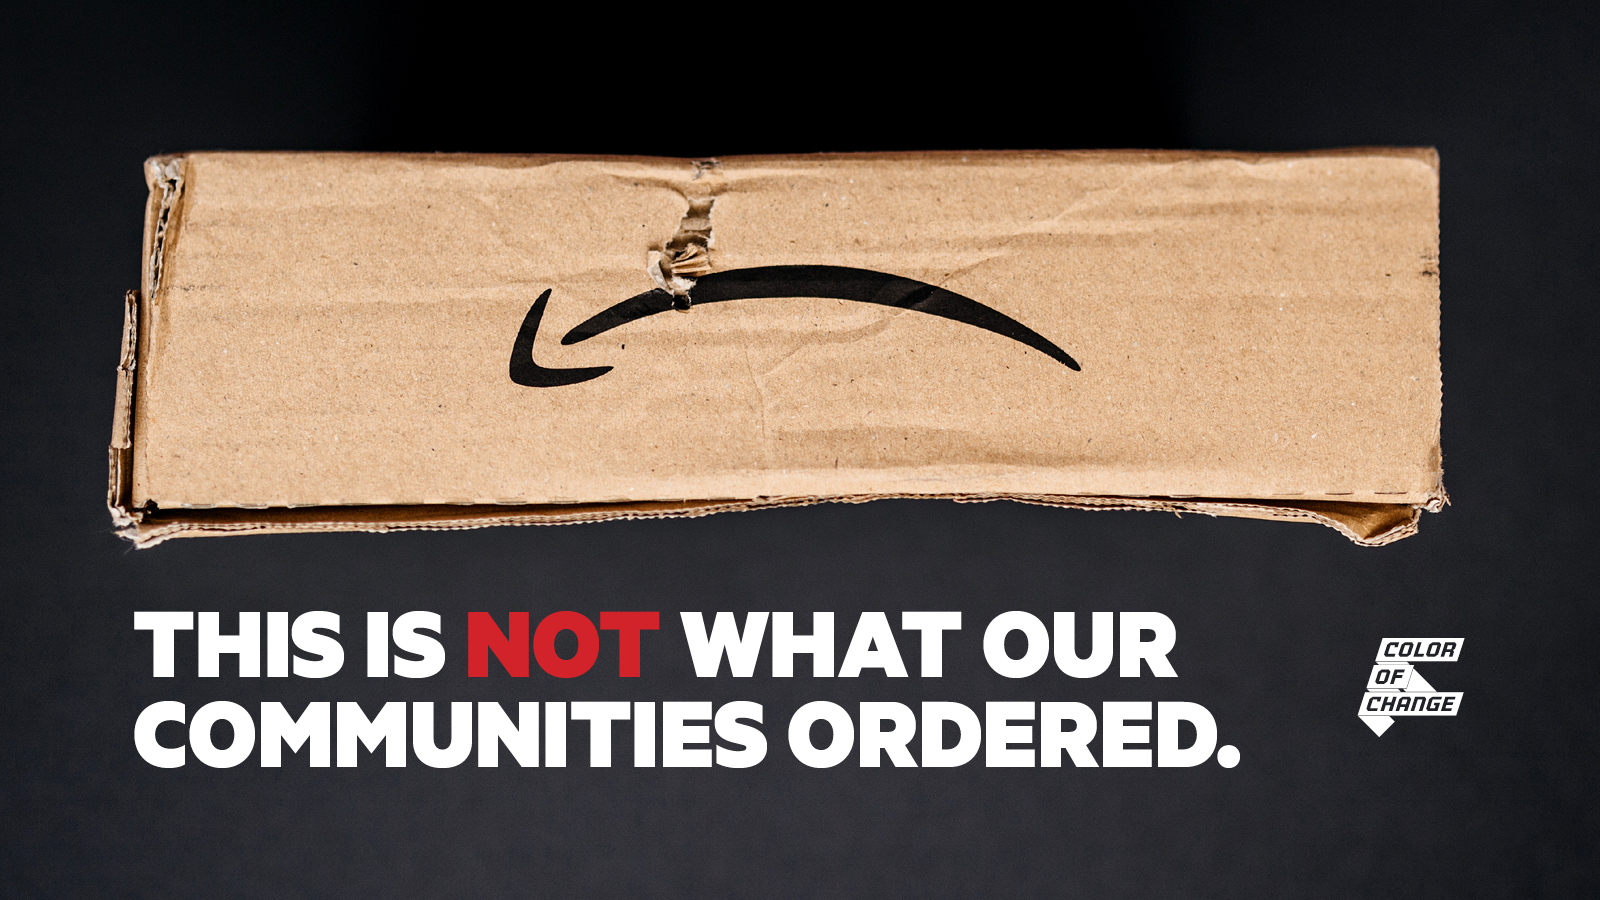 An image of a damaged package with the Amazon logo upside down so it looks like a frown. The text reads 